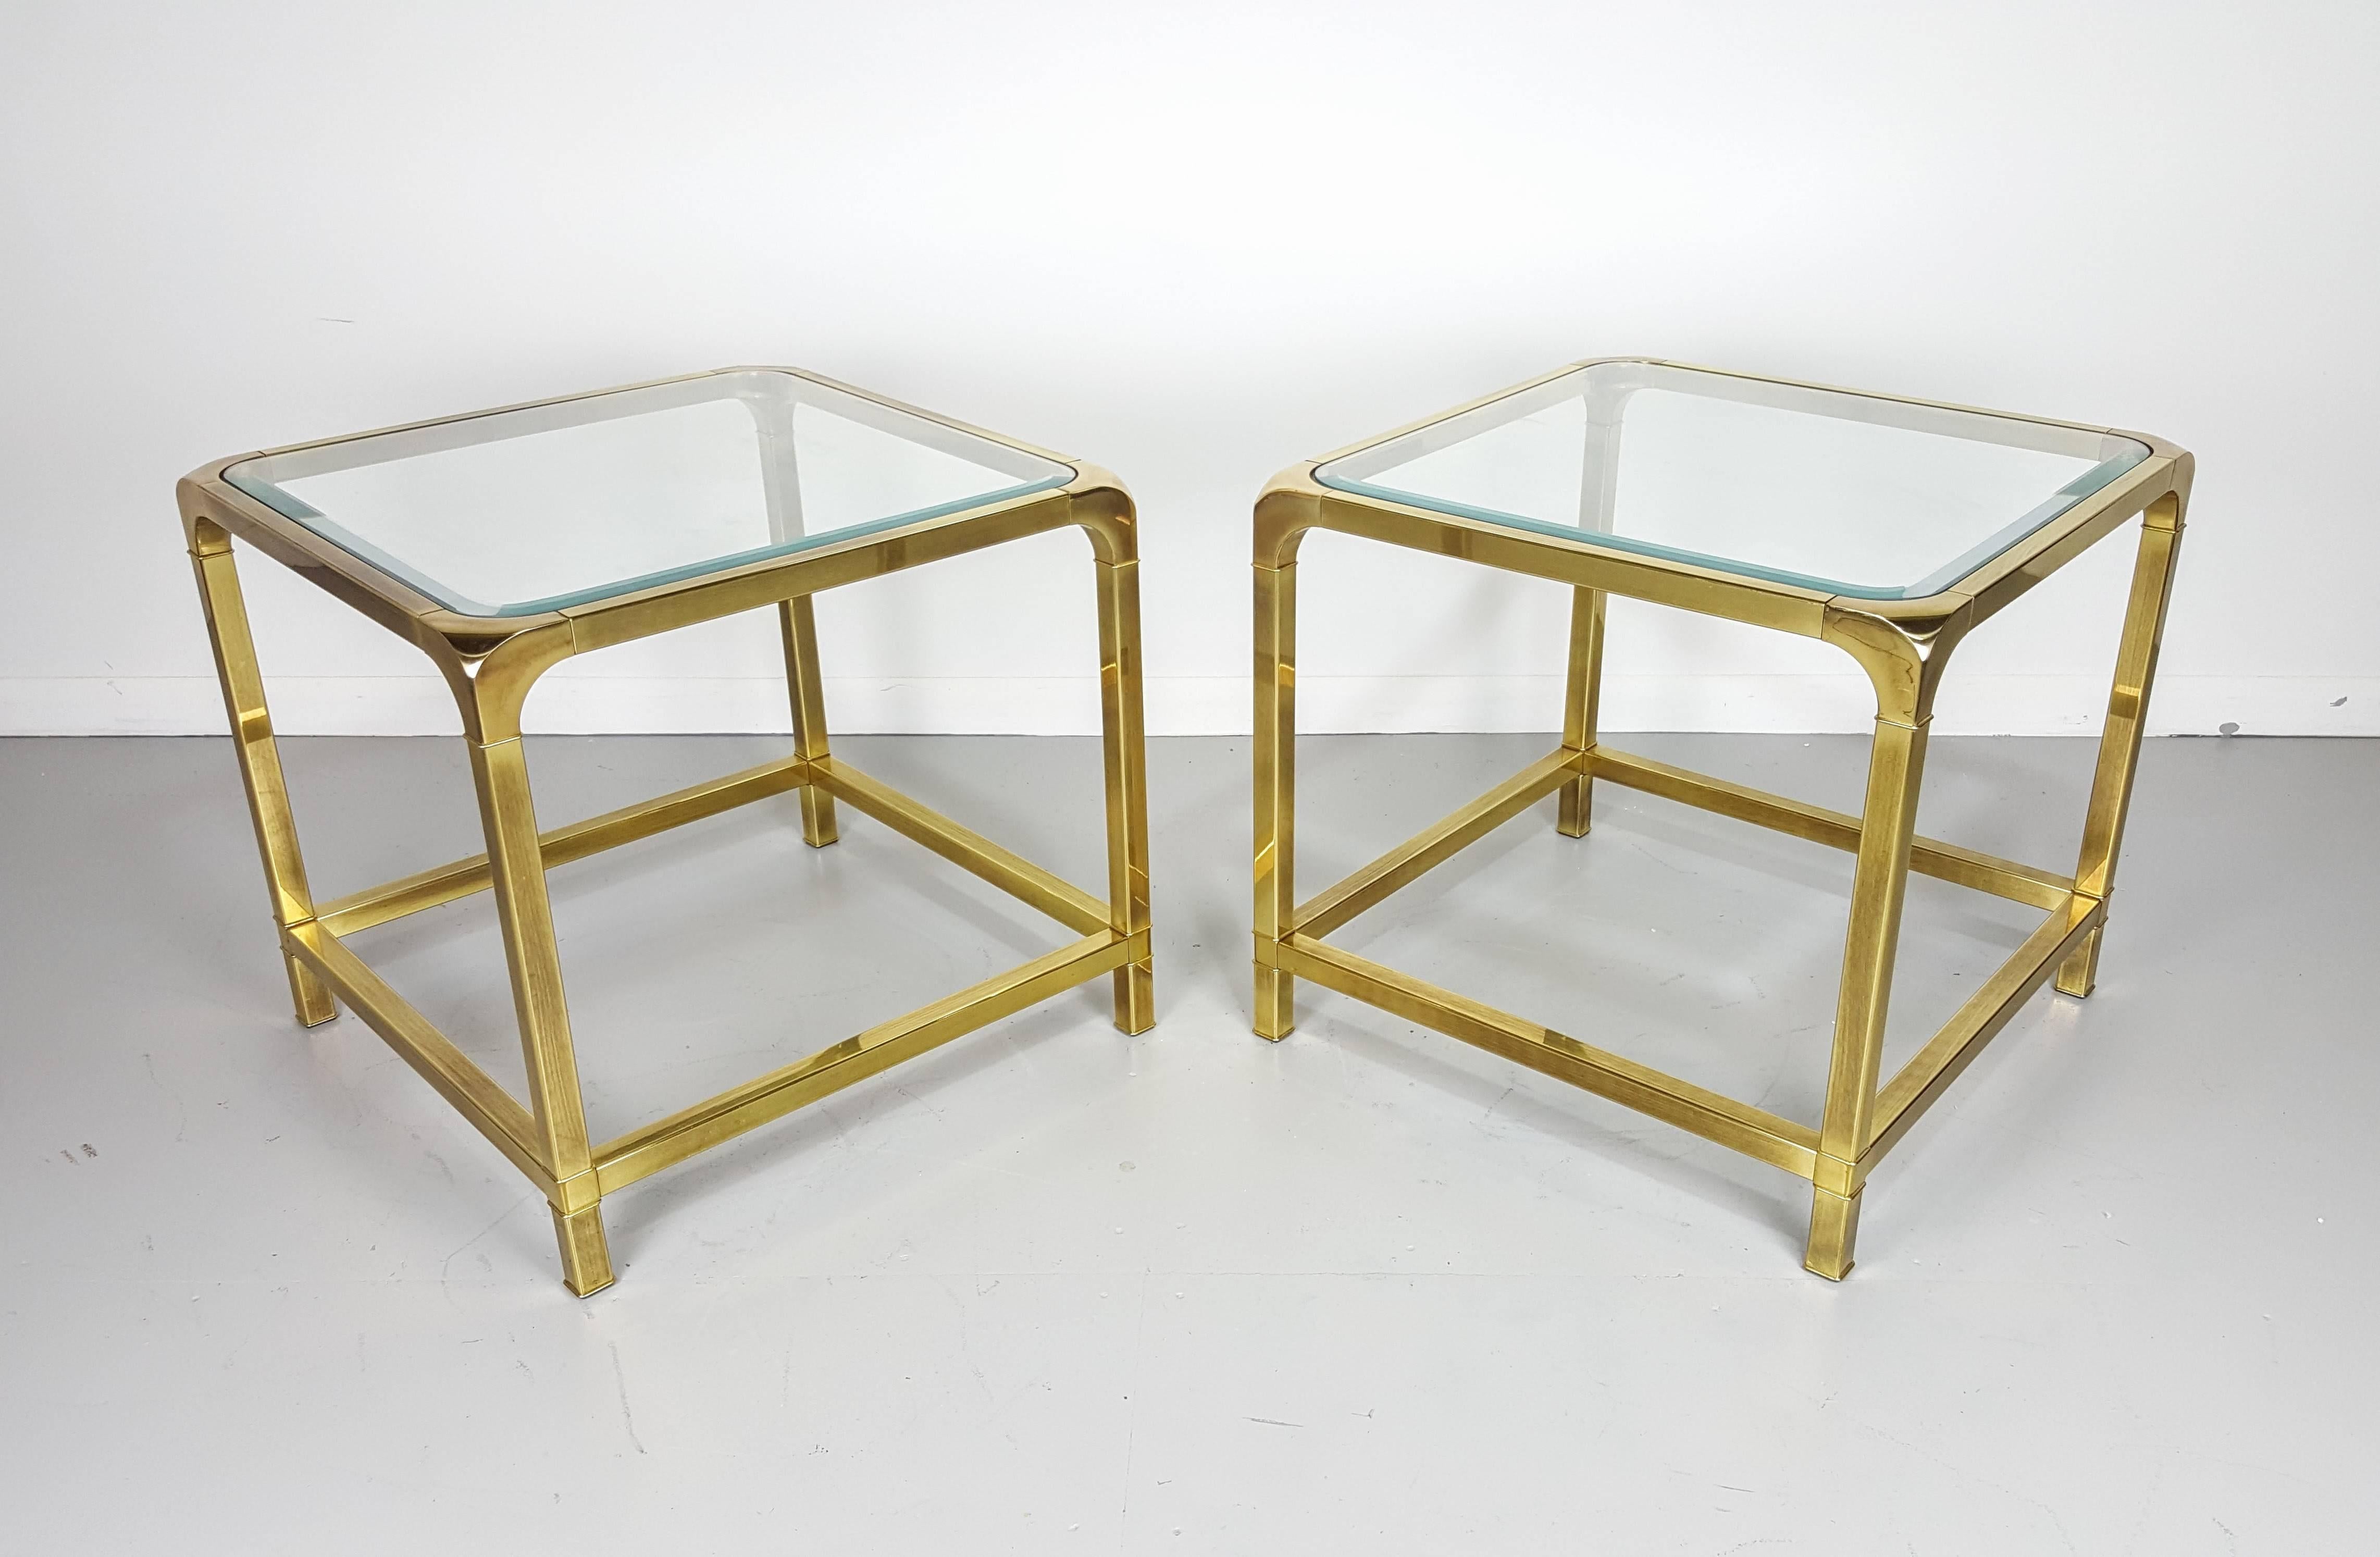 American Pair of Large Patinated Brass End Tables by Mastercraft, 1970s